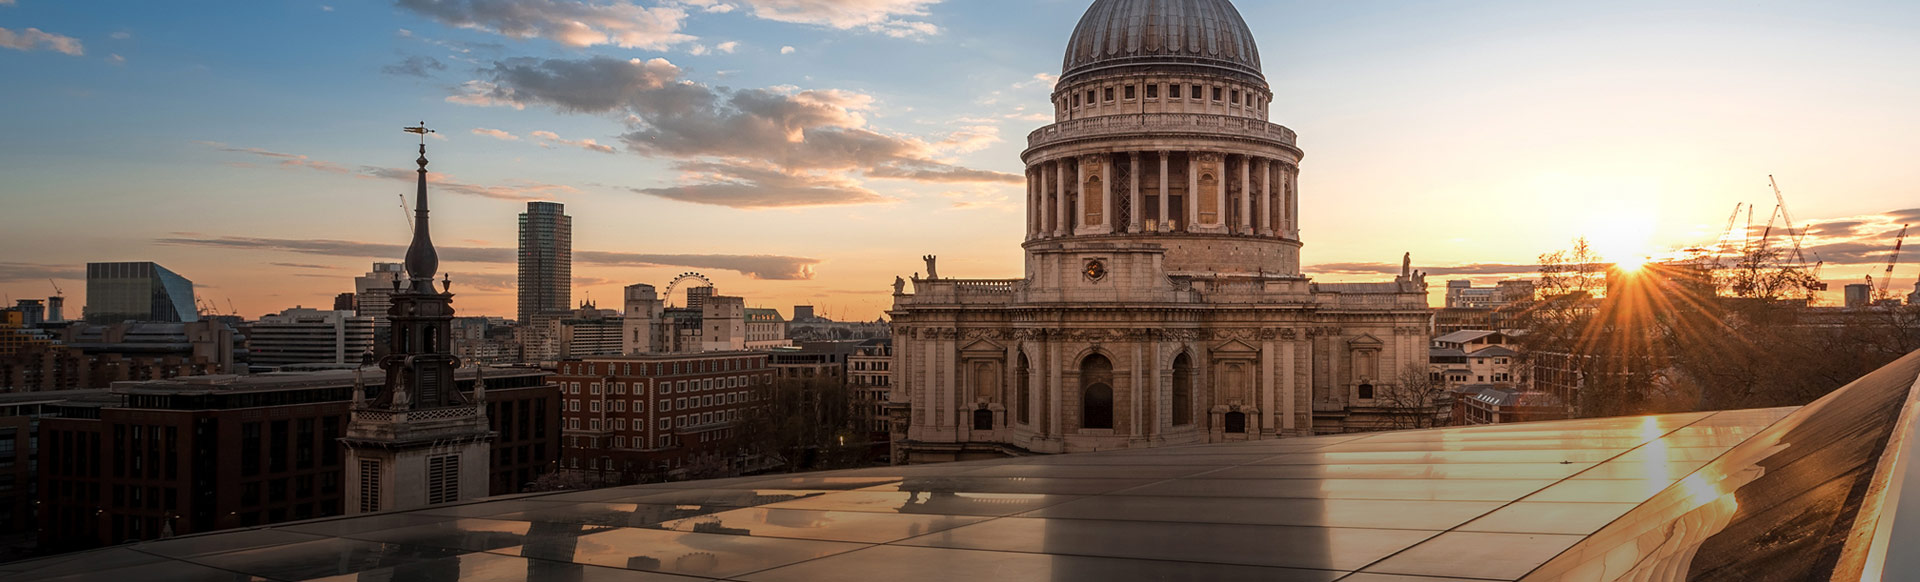 St Paul's Cathedral and London's skyline at sunset. Image courtesy of Shutterstock